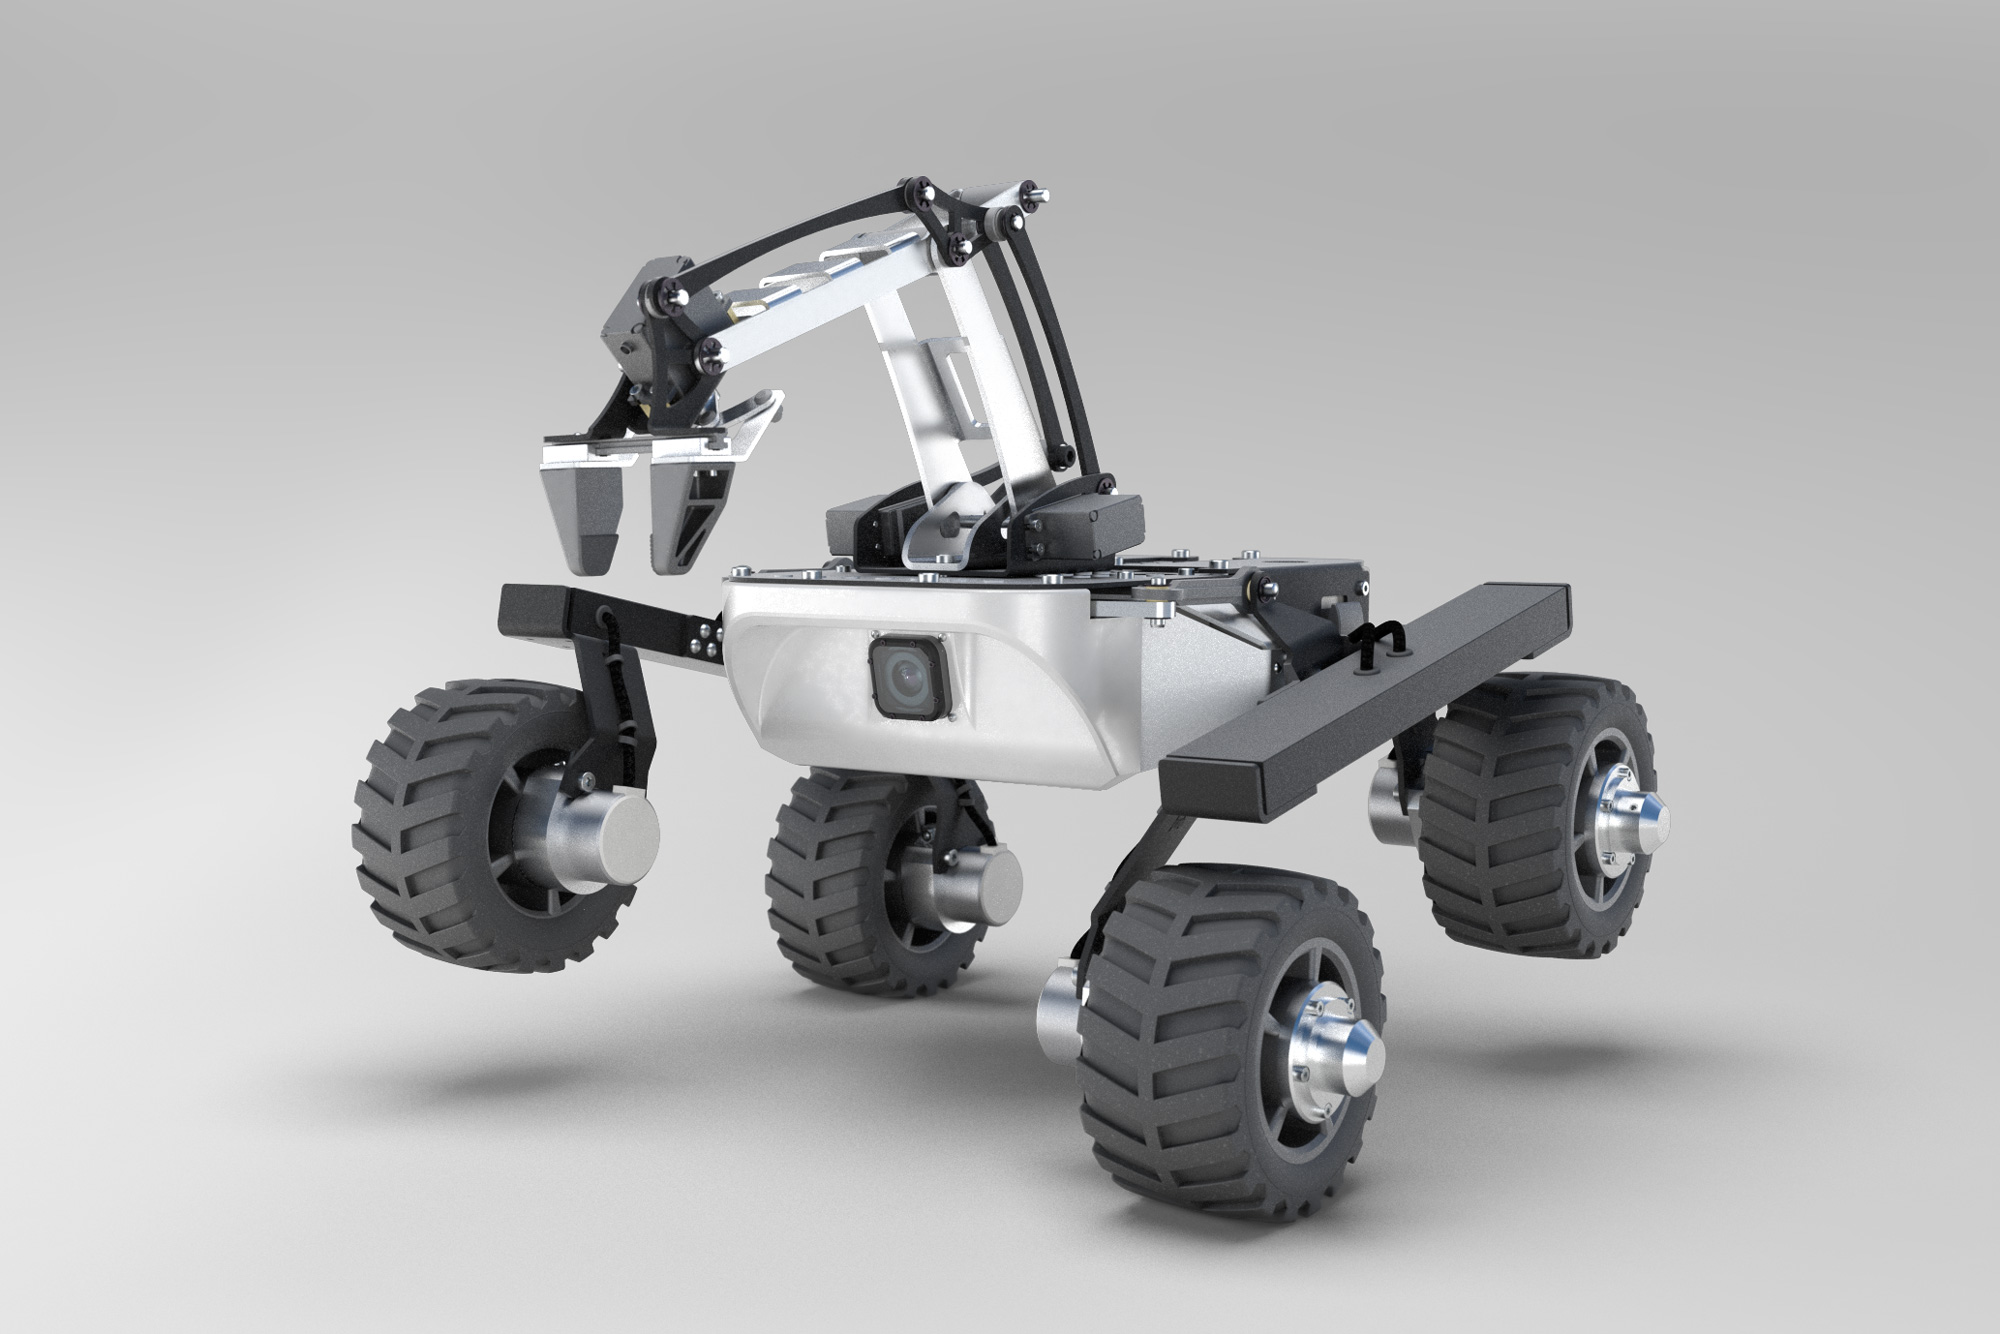 Turtle Rover – World’s First Rover for Earth Exploration